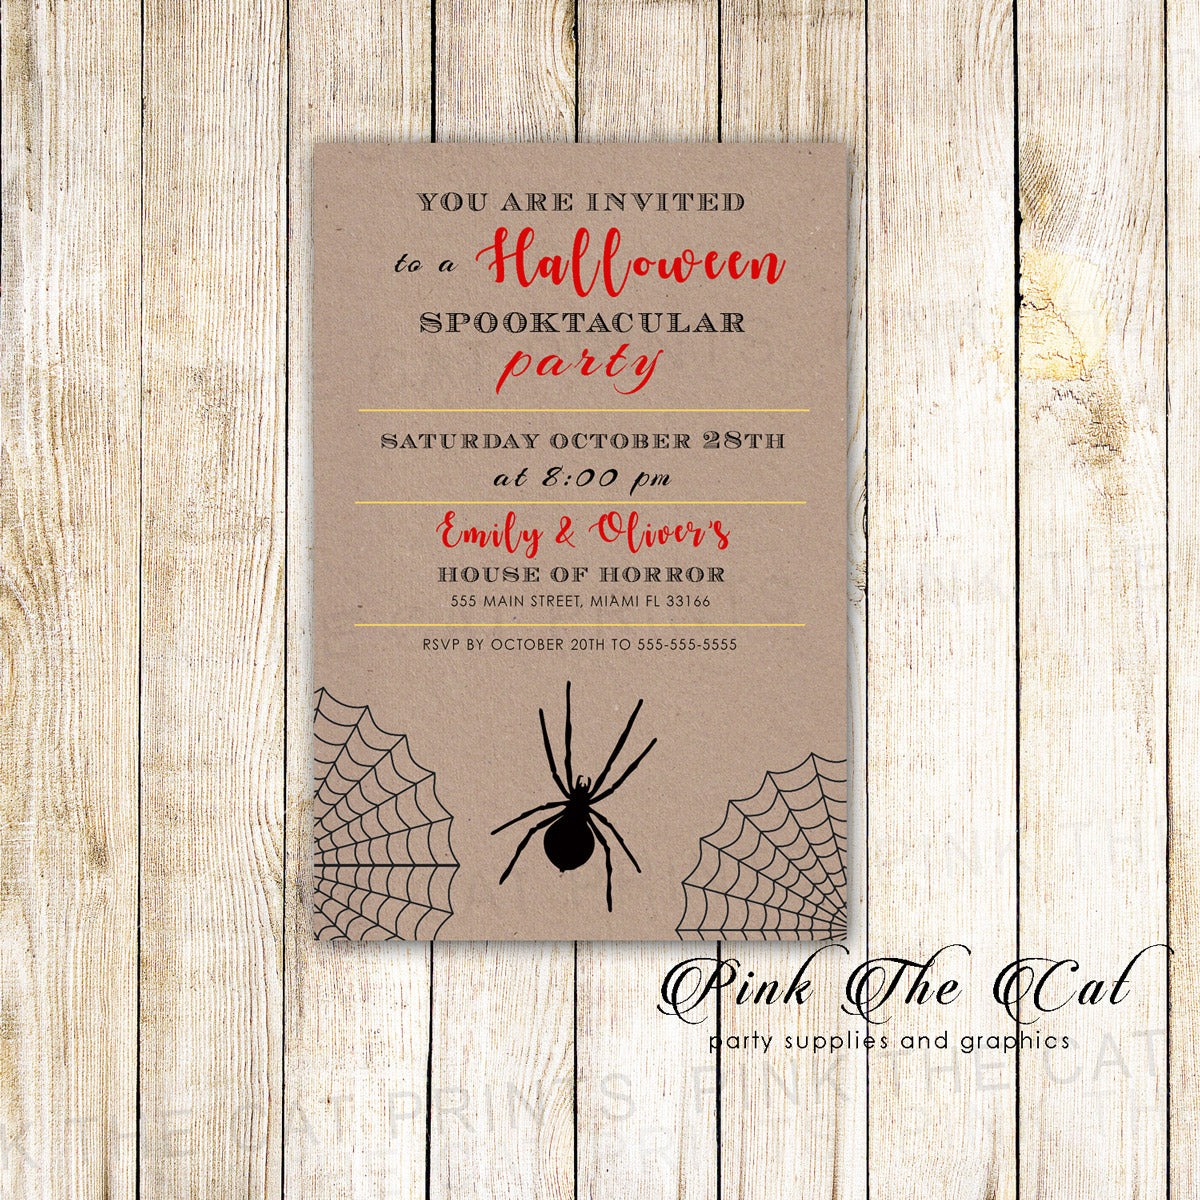 Halloween party invitation rustic spider